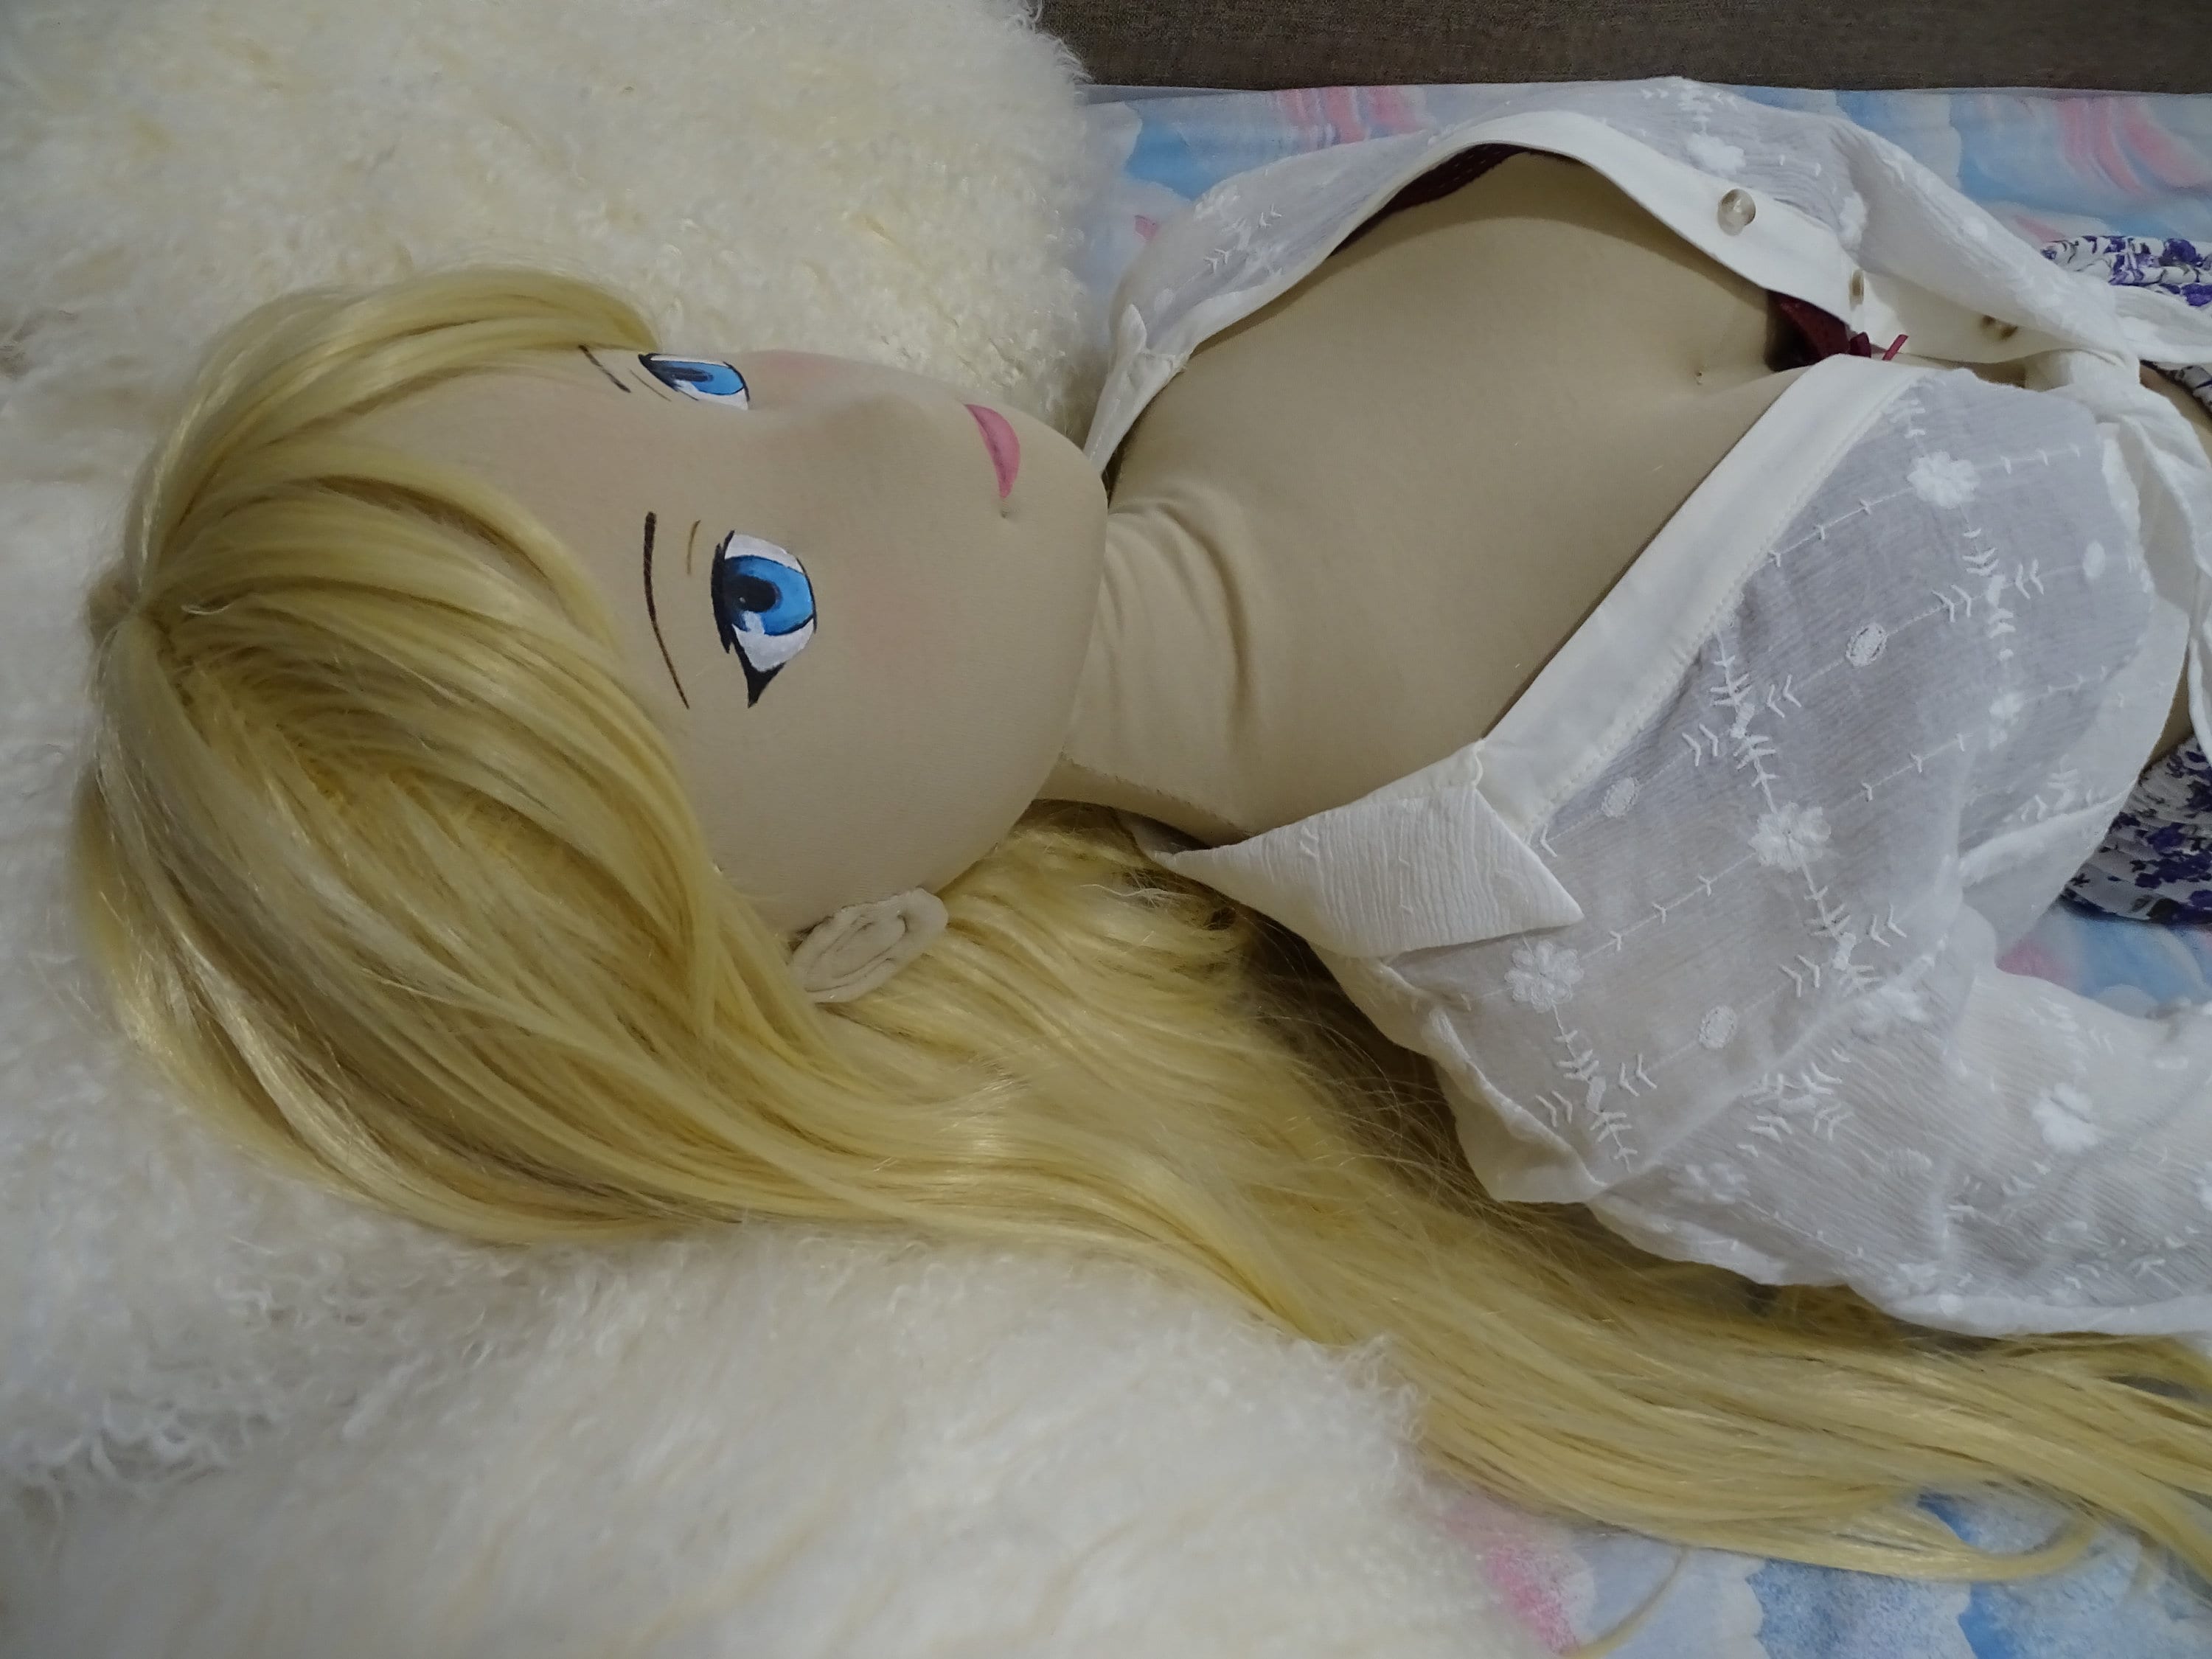 Wholesale Life Size Anime Doll Products at Factory Prices from